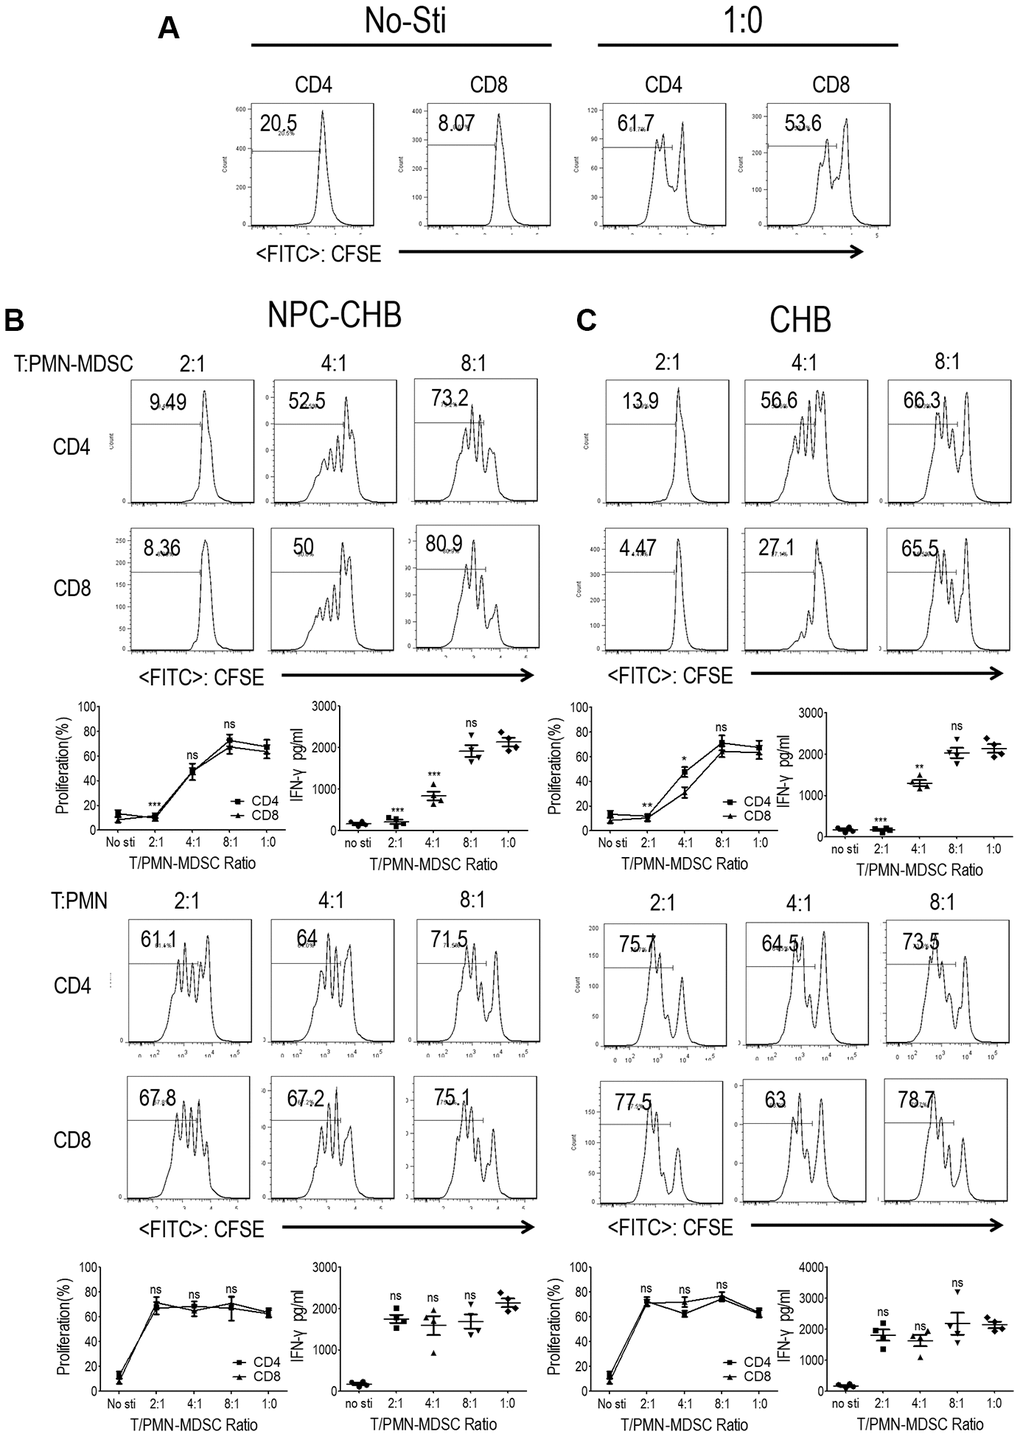 LOX-1+ PMN-MDSCs from NPC survivors with CHB and from patients with CHB suppressed T cell proliferation and activation. CD3+ T cells from PBMCs were labeled with CFSE, stimulated with anti-CD3 and anti-CD28, and then cocultured with LOX-1+ PMN-MDSCs or LOX-1- PMN from the same donors at different ratios for 3 days. CD4+ and CD8+ T cell proliferation was evaluated by CFSE labeling and IFN-γ production in supernatants by ELISA. (A) T cells receiving no anti-CD3/anti-CD28 stimulation were used as negative controls with stimulated T cells without the addition of LOX-1+ PMN-MDSC/PMN as a positive control. (B) The influence of LOX-1+ PMN-MDSCs or LOX-1- PMN from NPC survivors with CHB on T cell proliferation was displayed by representative of one independent experiment, cumulative data, and concentration of IFN-γ in the media. (C) The influence of LOX-1+ PMN-MDSCs or LOX-1- PMN from CHB patients on T cell proliferation was shown by representative of one independent experiment, cumulative data, and concentration of IFN-γ in the media. (Comparison was made between the 1:0 group and experimental groups), (n = 4 in each group) *, P P P 